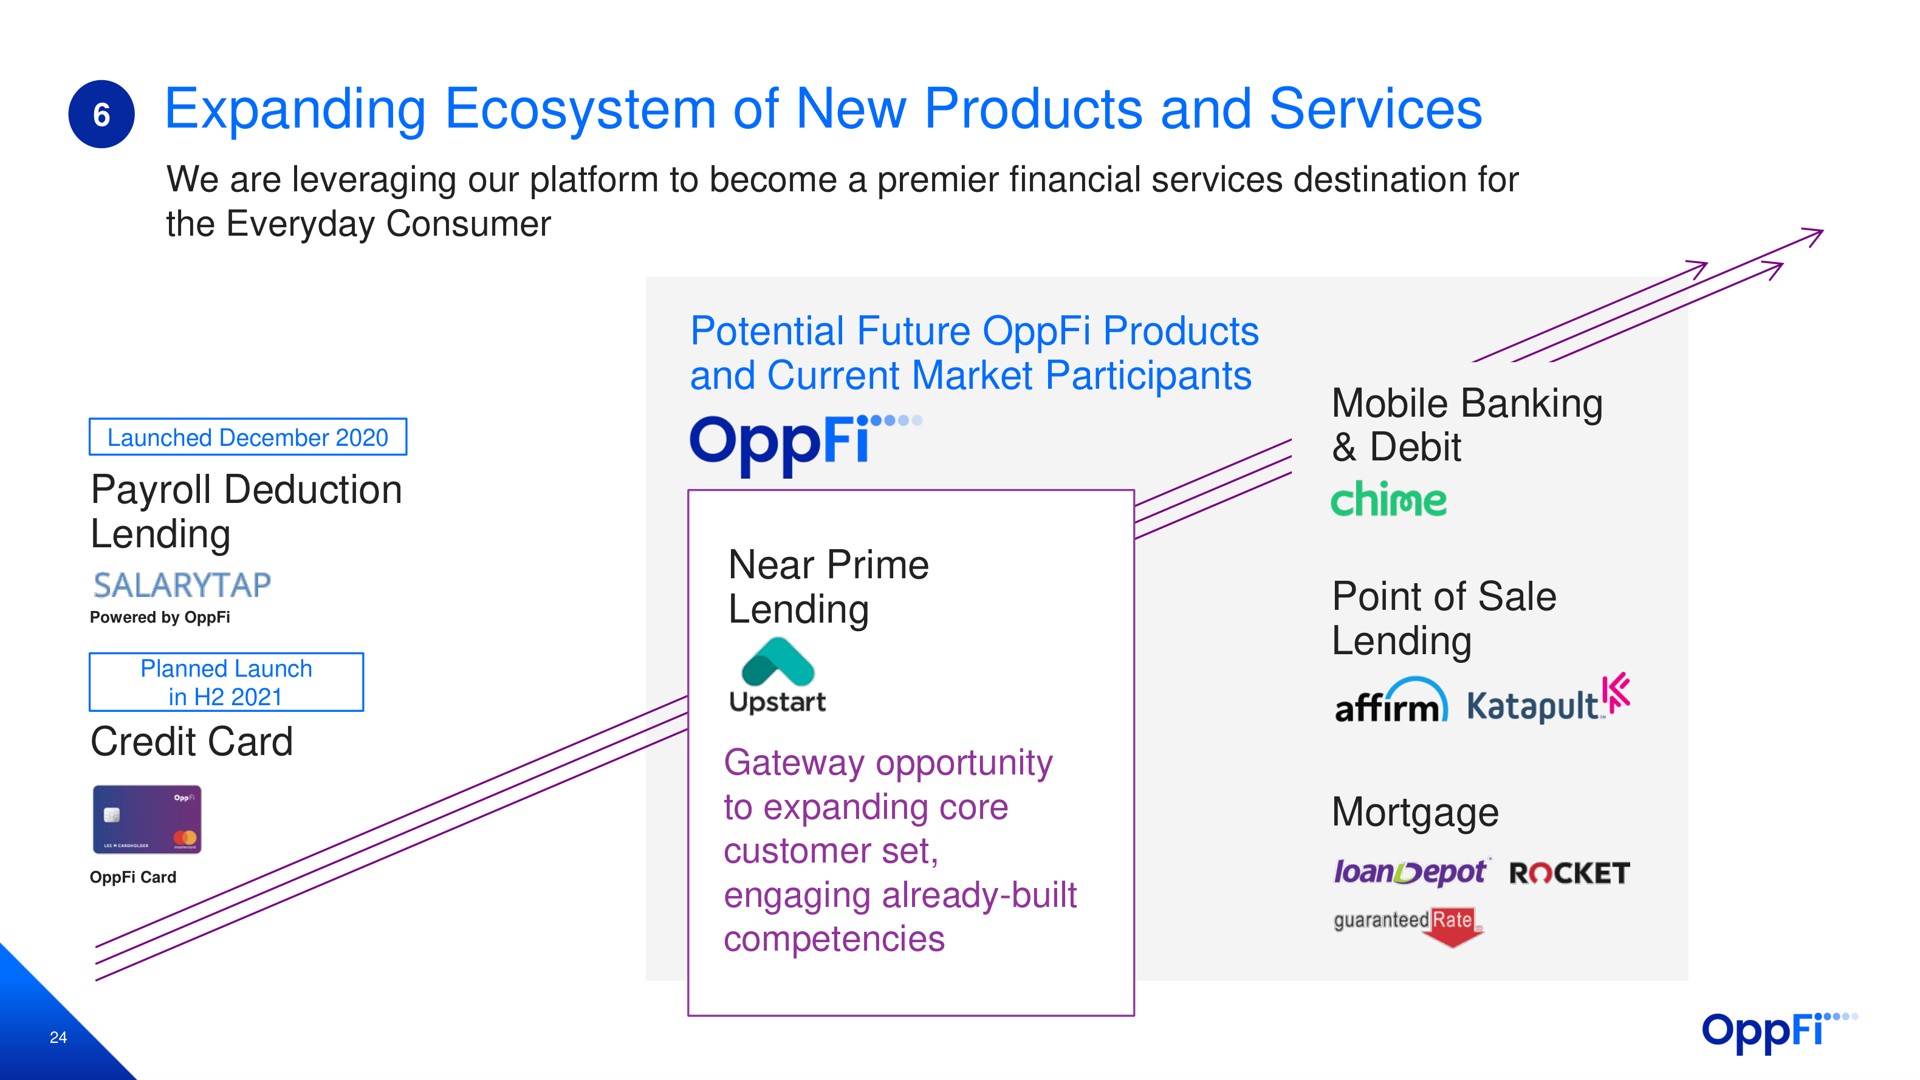 expanding ecosystem of new products and services we are leveraging our platform to become a premier financial services destination for the everyday consumer payroll deduction lending credit card potential future products and current market participants near prime lending gateway opportunity to expanding core customer set engaging already built competencies mobile banking debit point of sale lending mortgage | OppFi